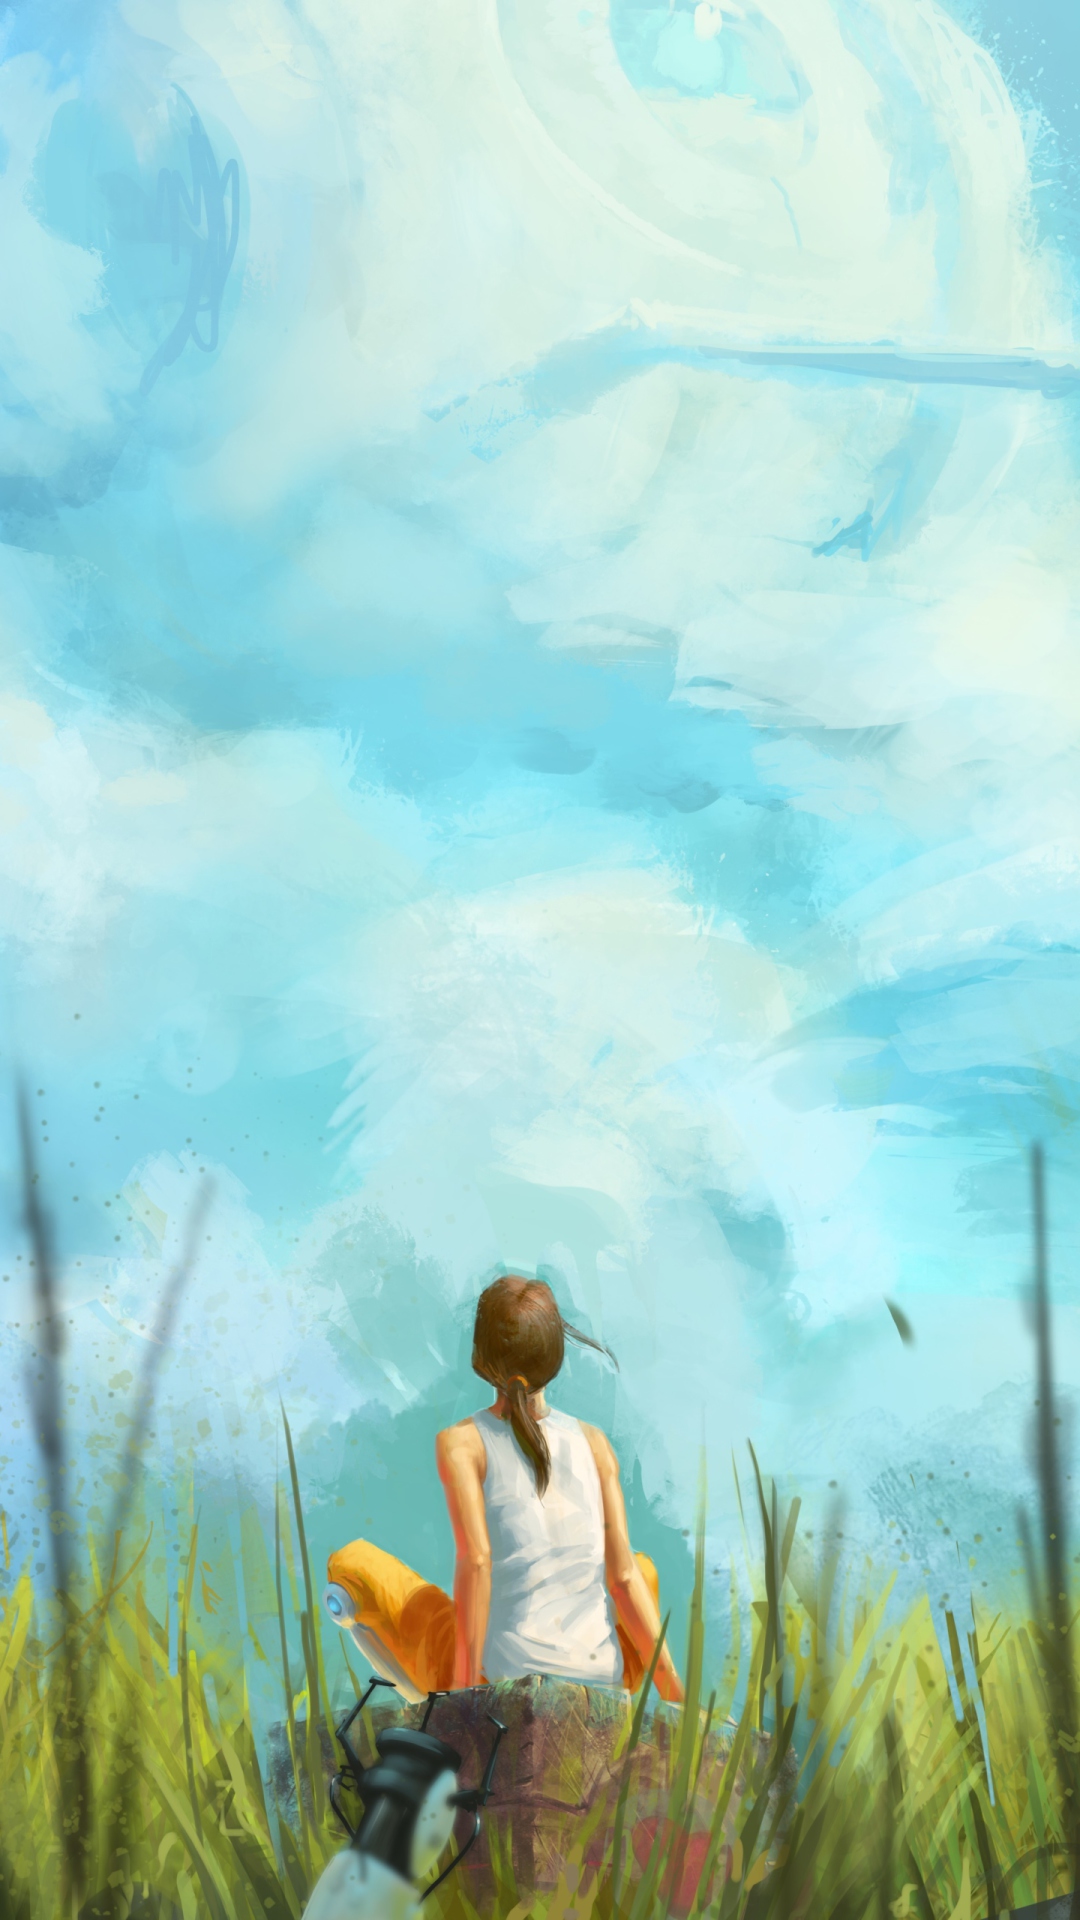 Sfondi Painting Of Girl, Green Field And Blue Sky 1080x1920